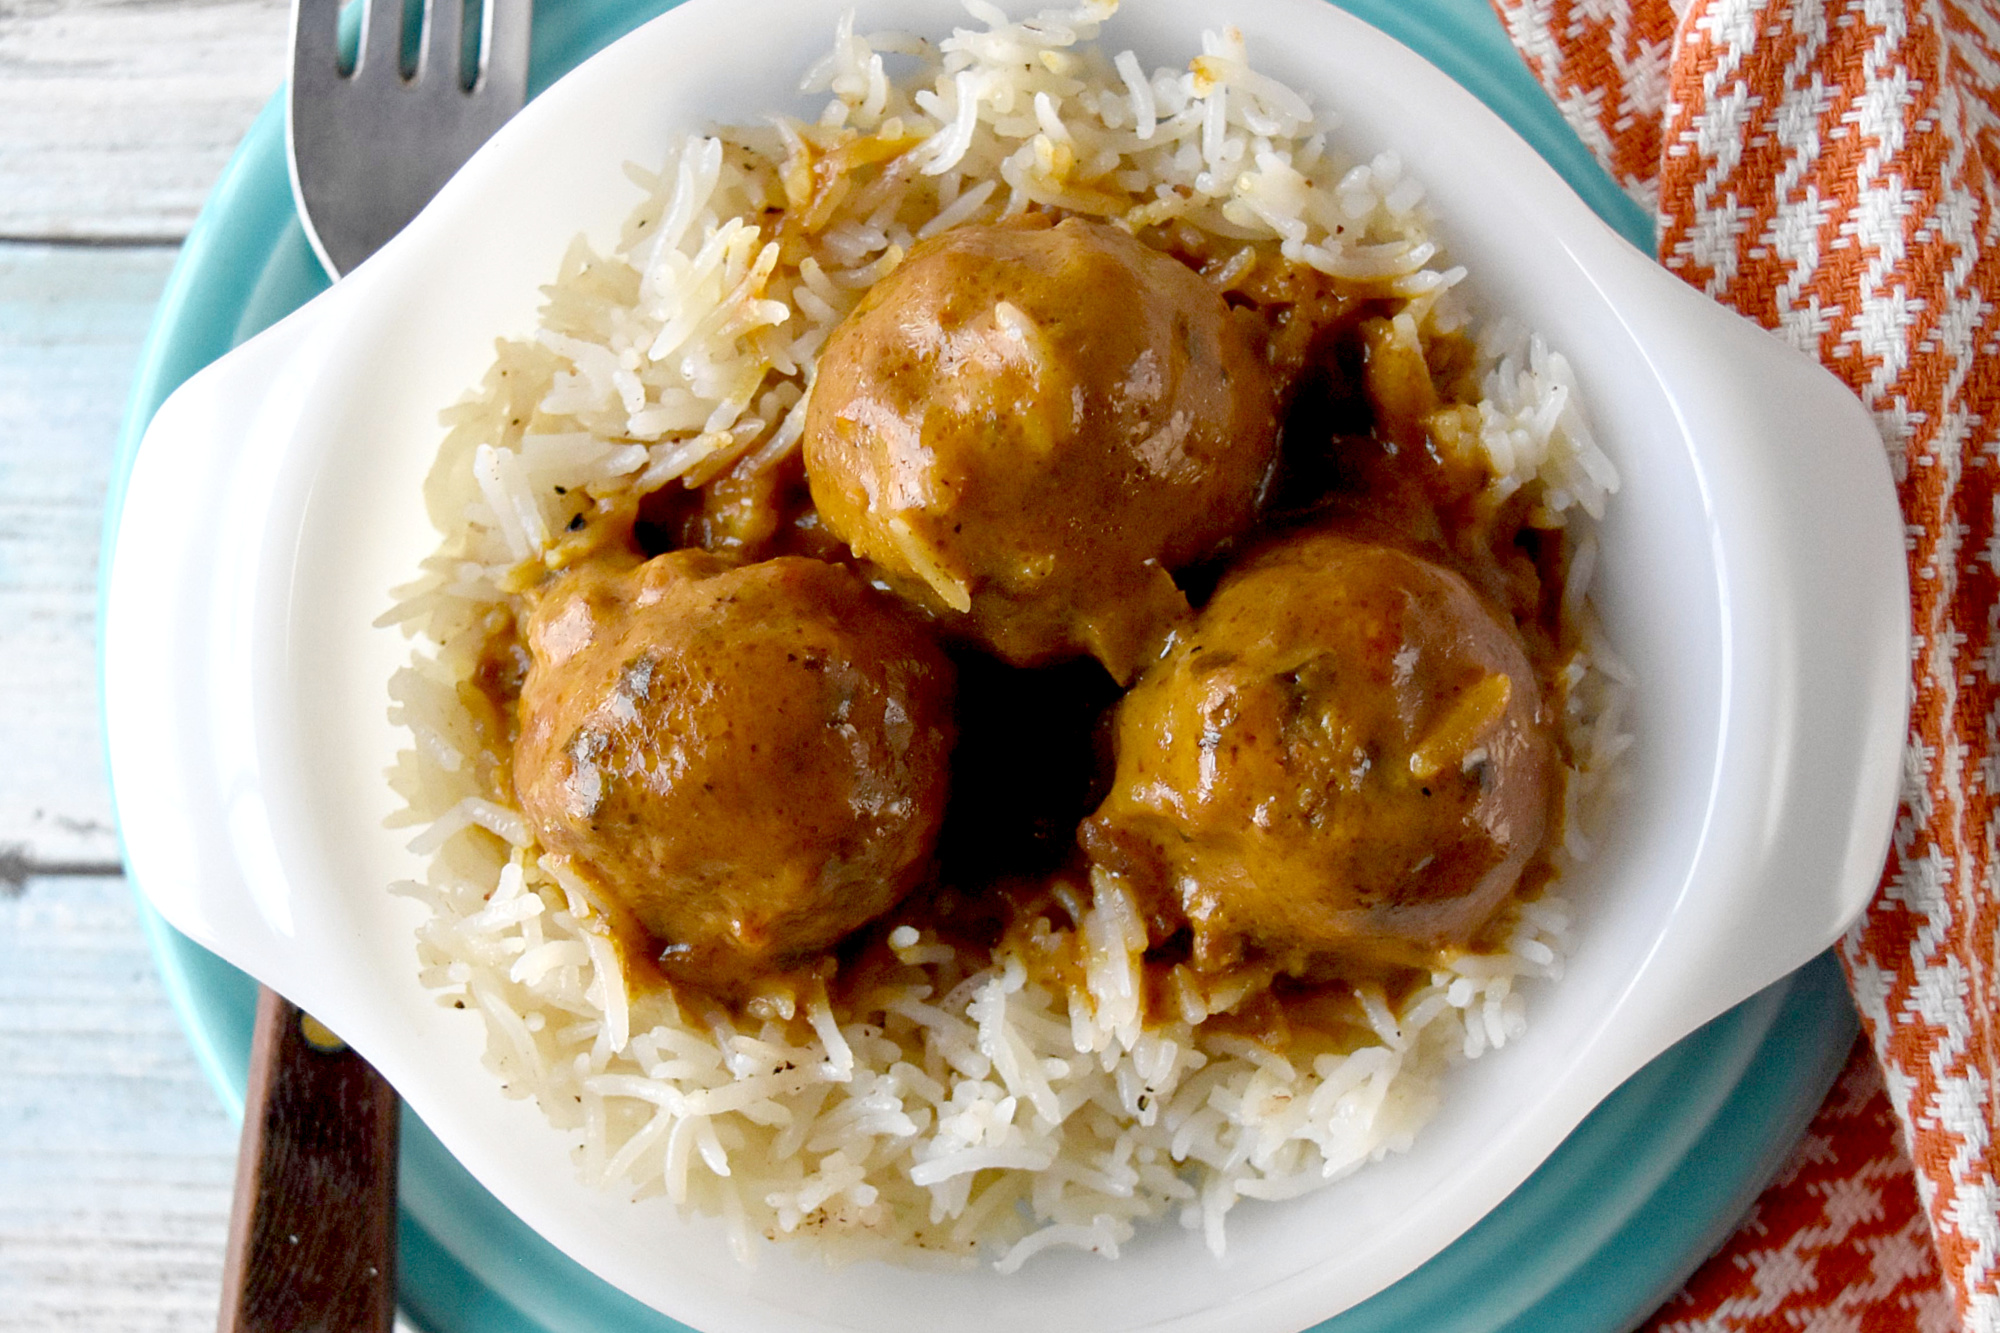 Thai Coconut Turkey Meatballs are packed with Thai flavor and creamy coconut goodness.  They’re a quick and easy meal for any night of the week.  #eatcleanlivehappy #kevinsnaturalfoods #kevinsrecipechallenge